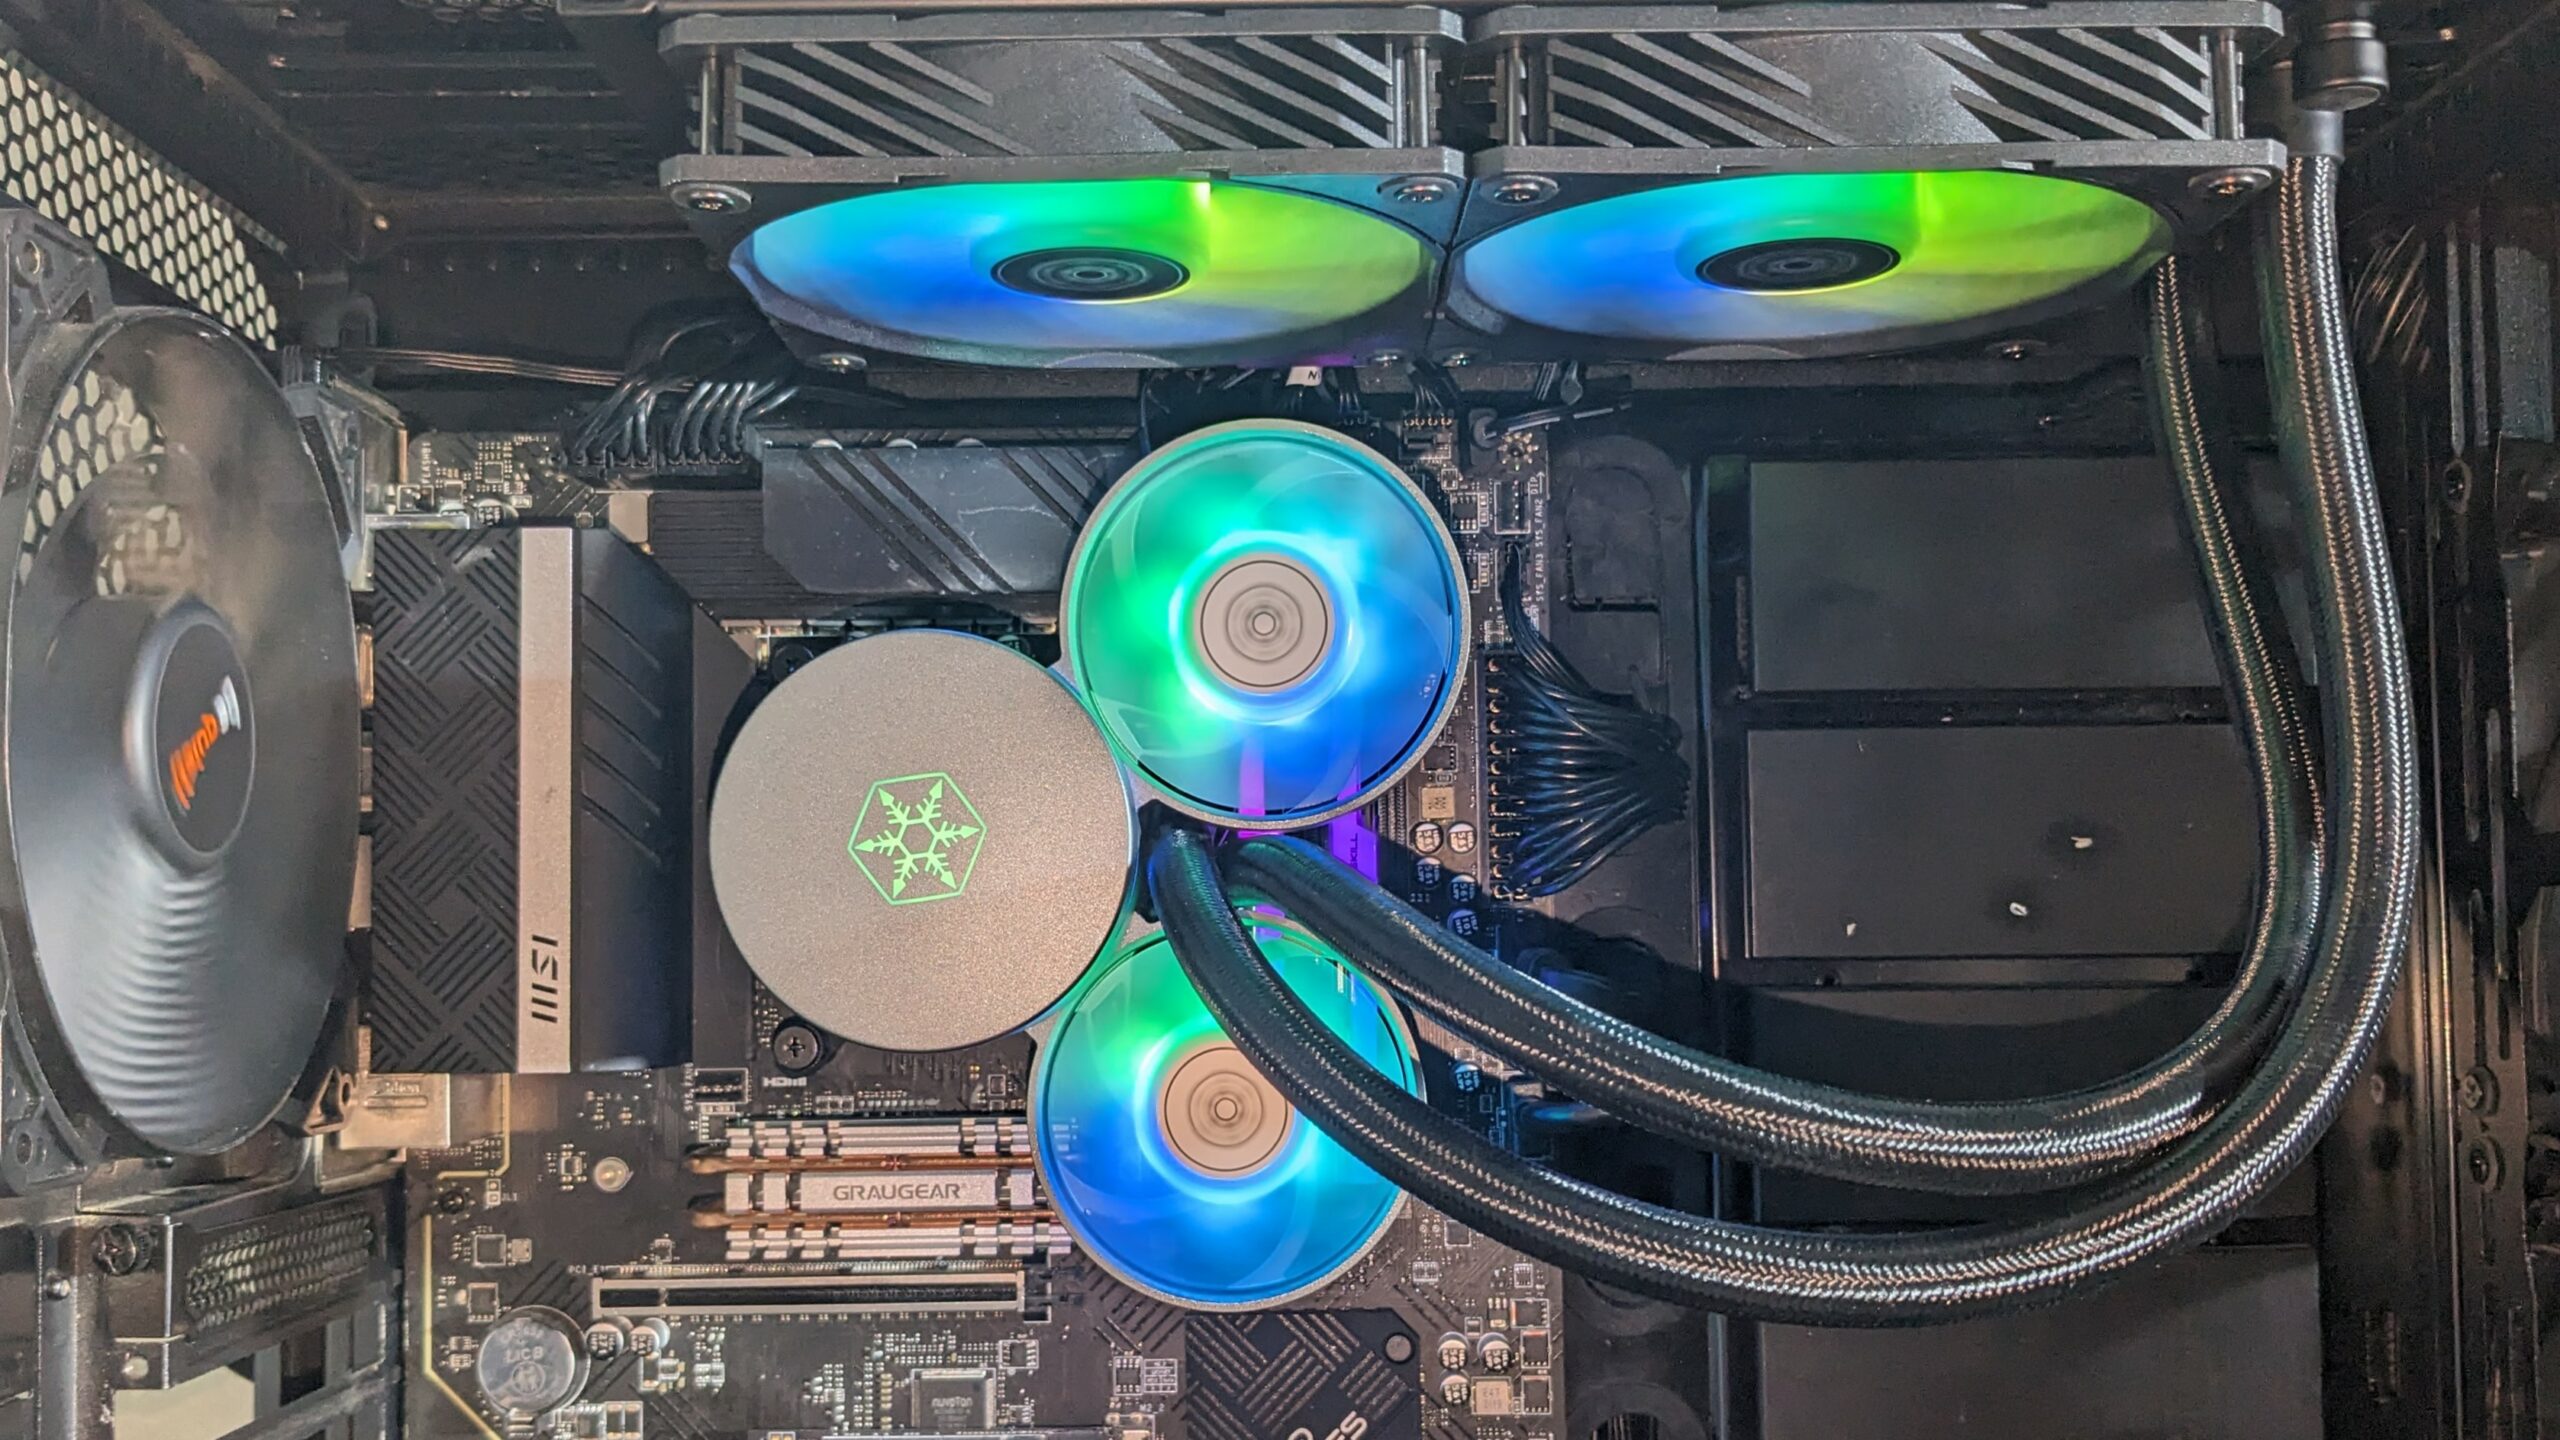 New reviews: Silverstone’s IceMyst, Thermalright’s SI-100, and more at other websites